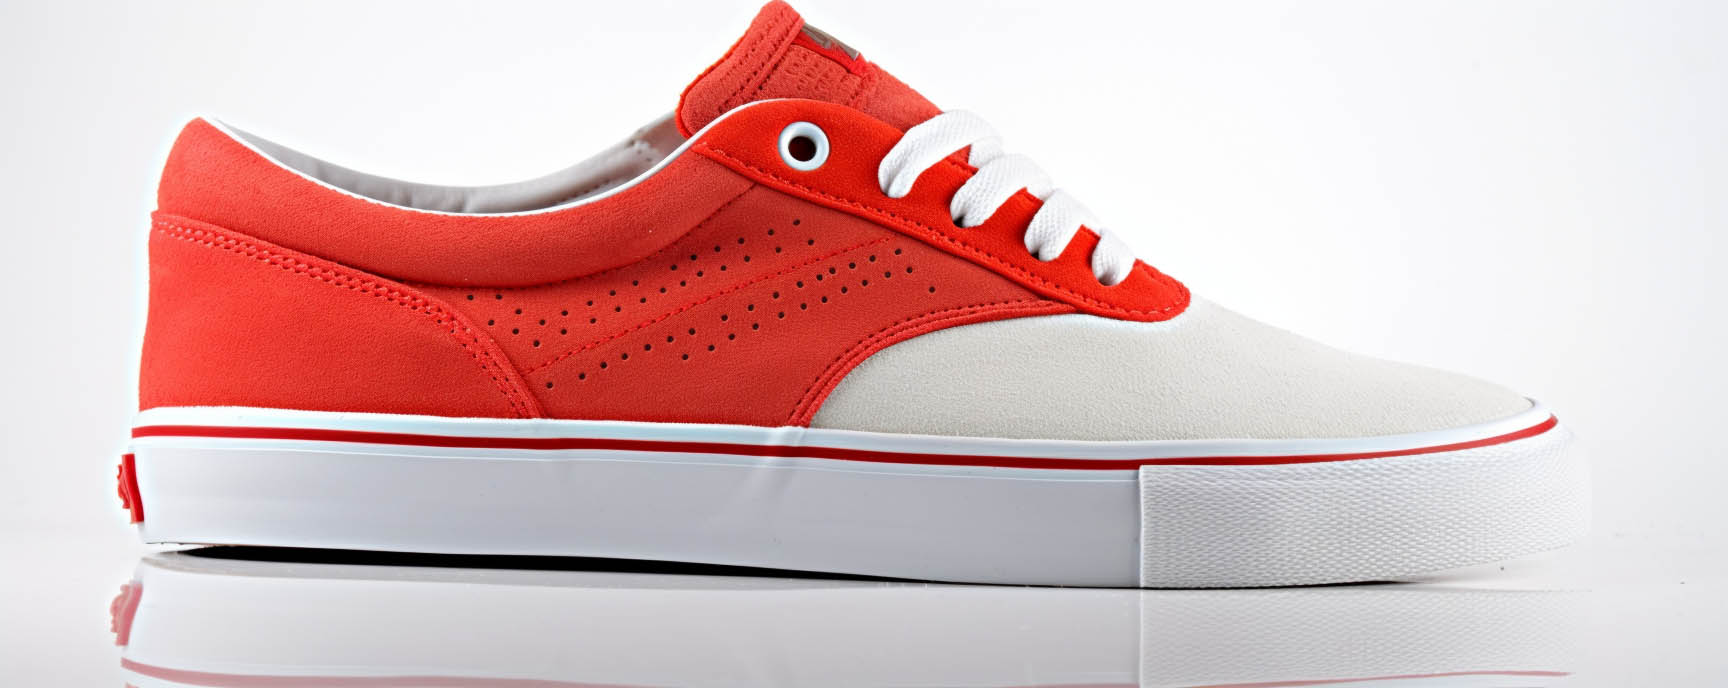 Red suede leather skate shoe made by 2HEX skate shoes factory. A skateboard shoes manufacturer.